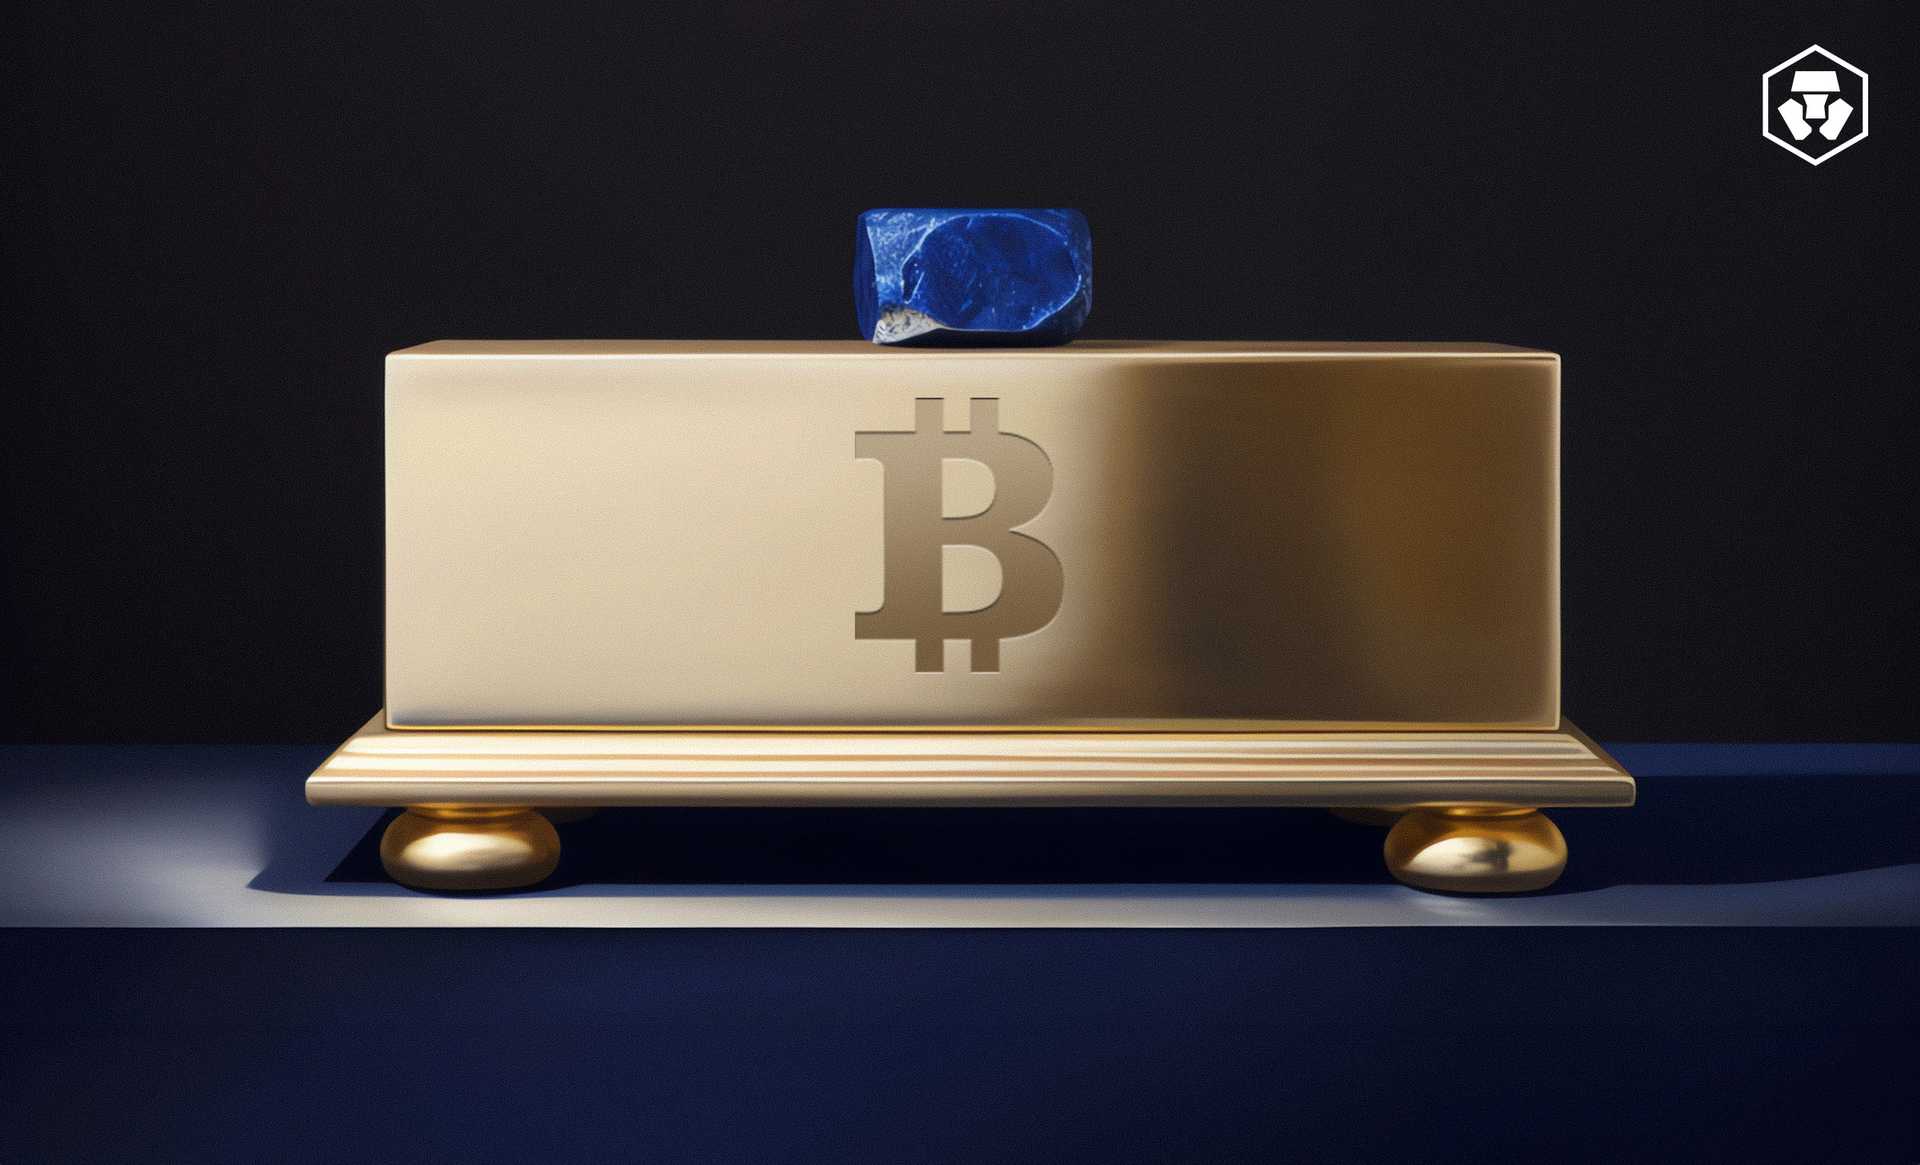 Why Is Bitcoin Valuable? Understand the Key Factors That Drive BTC’s Worth